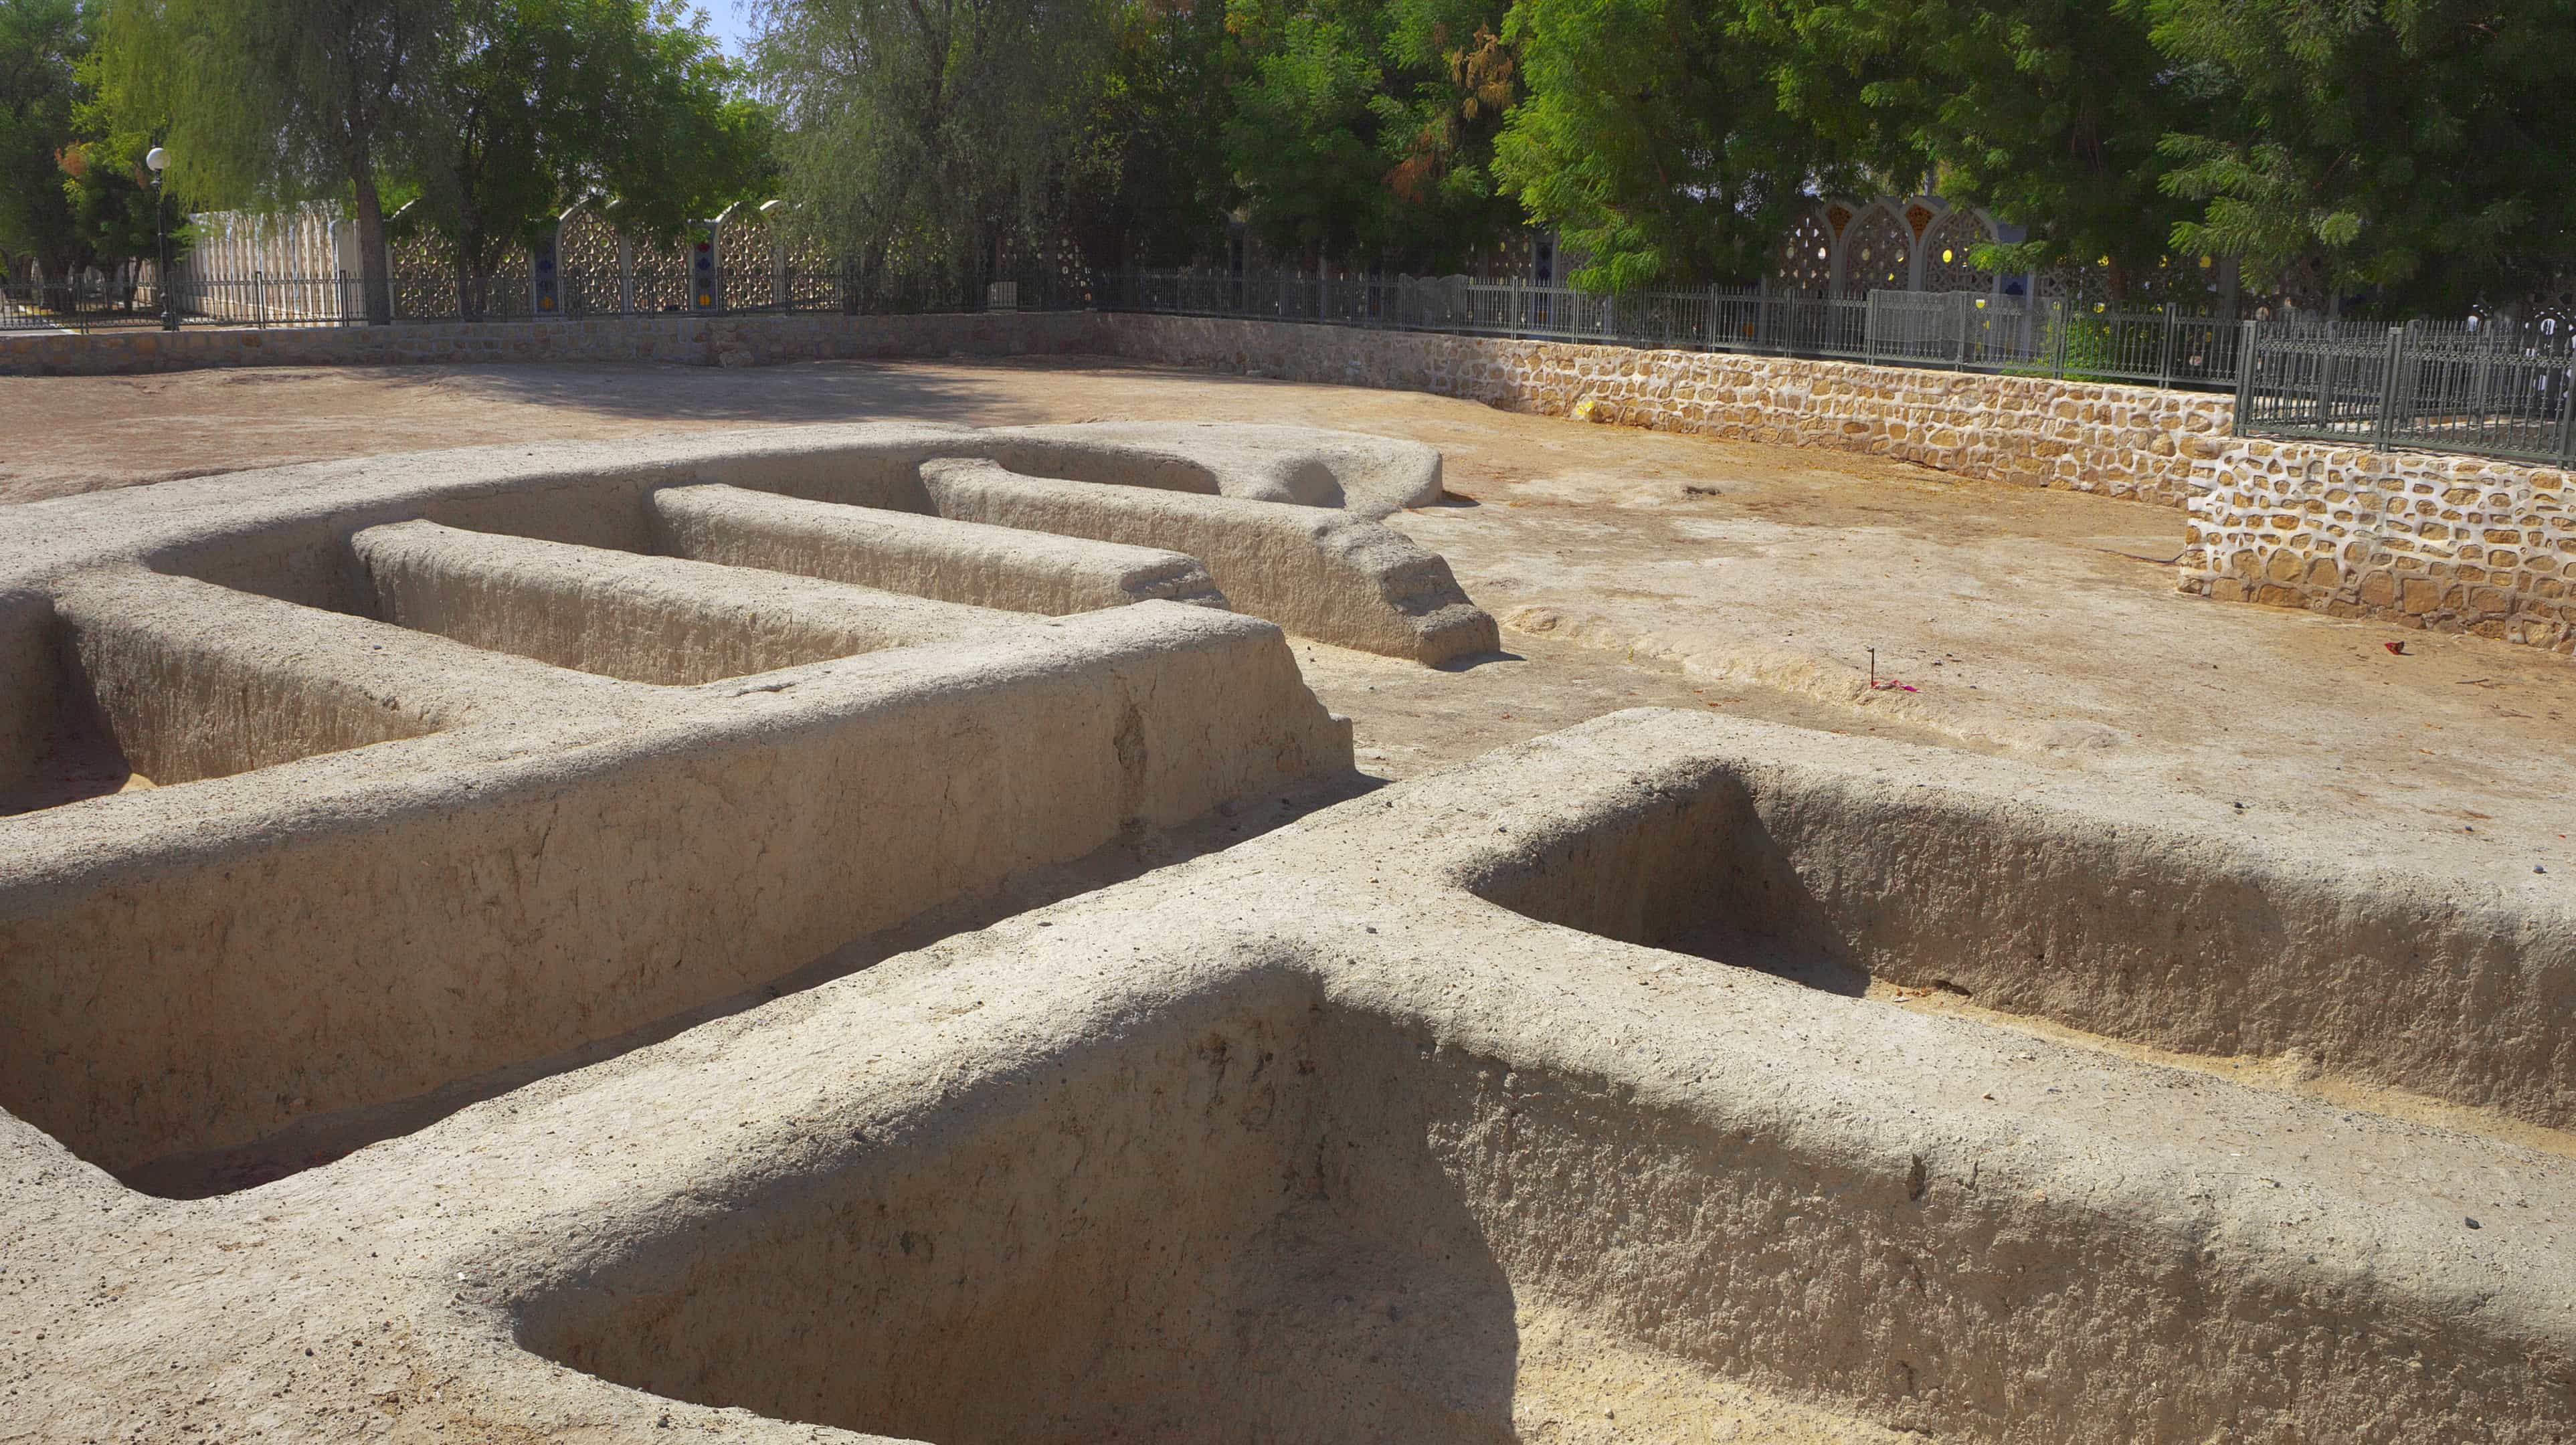 Archaeological ruins at Hili Archaeological Park